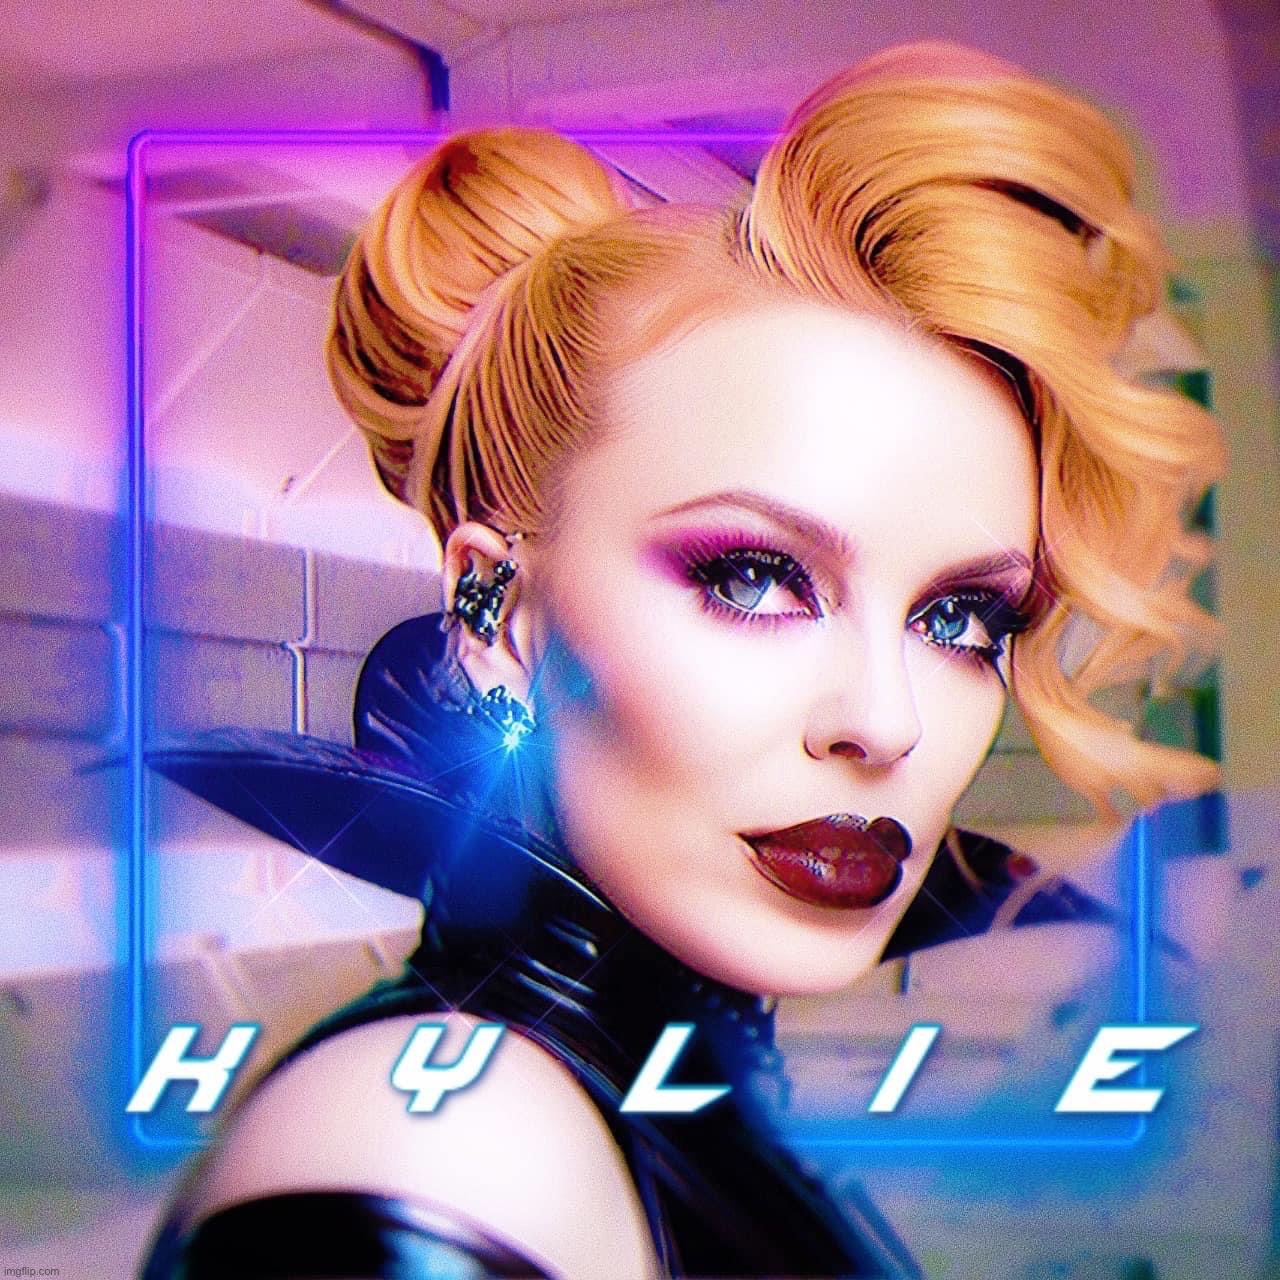 Kylie AI art album cover | image tagged in kylie ai art album cover | made w/ Imgflip meme maker